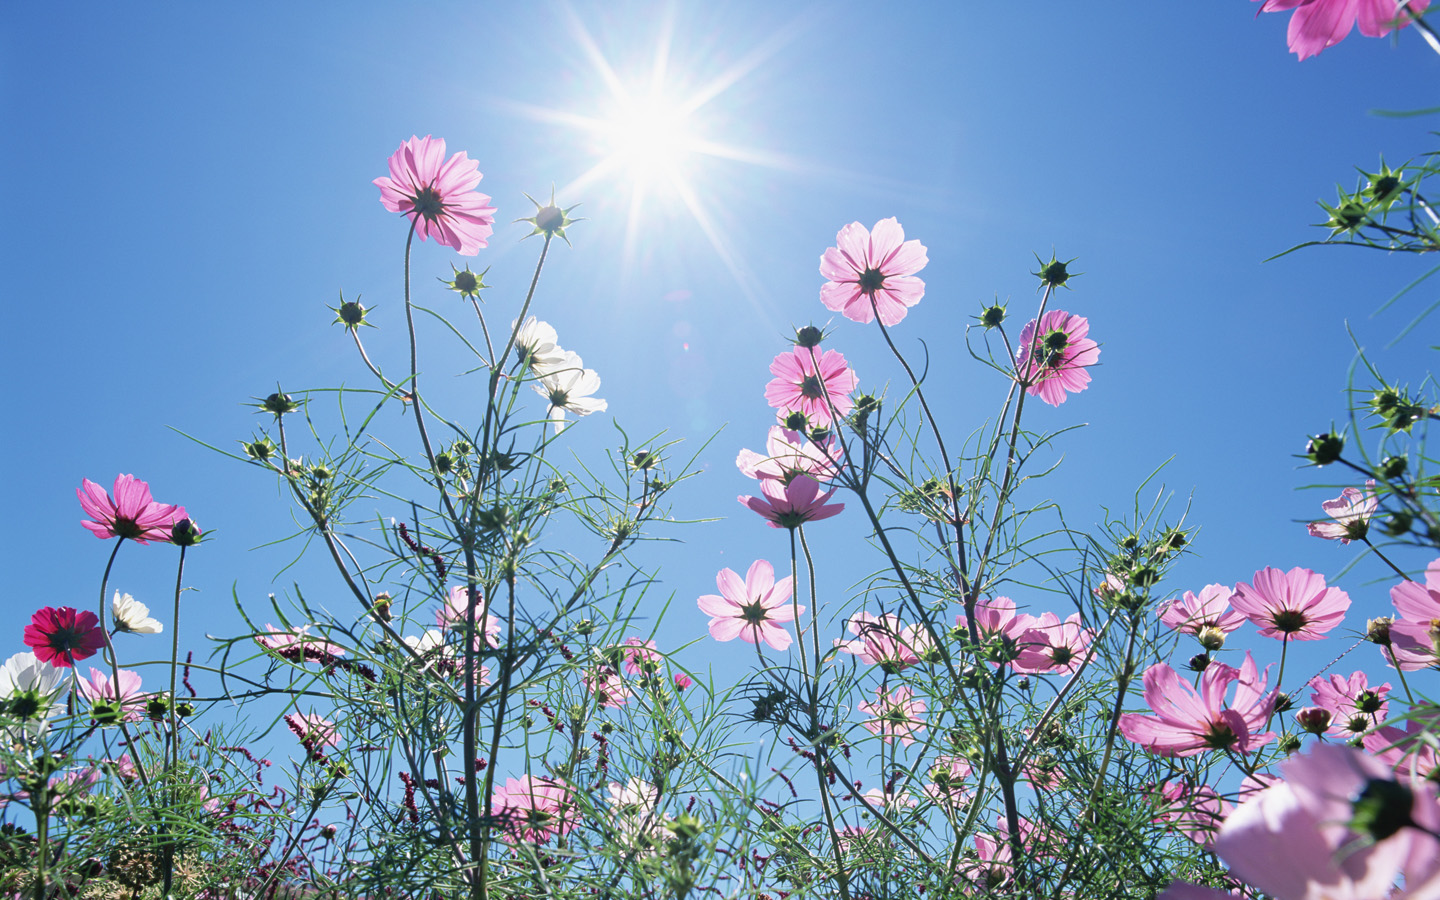 good morning with flowers wallpapers,flower,flowering plant,plant,sky,garden cosmos